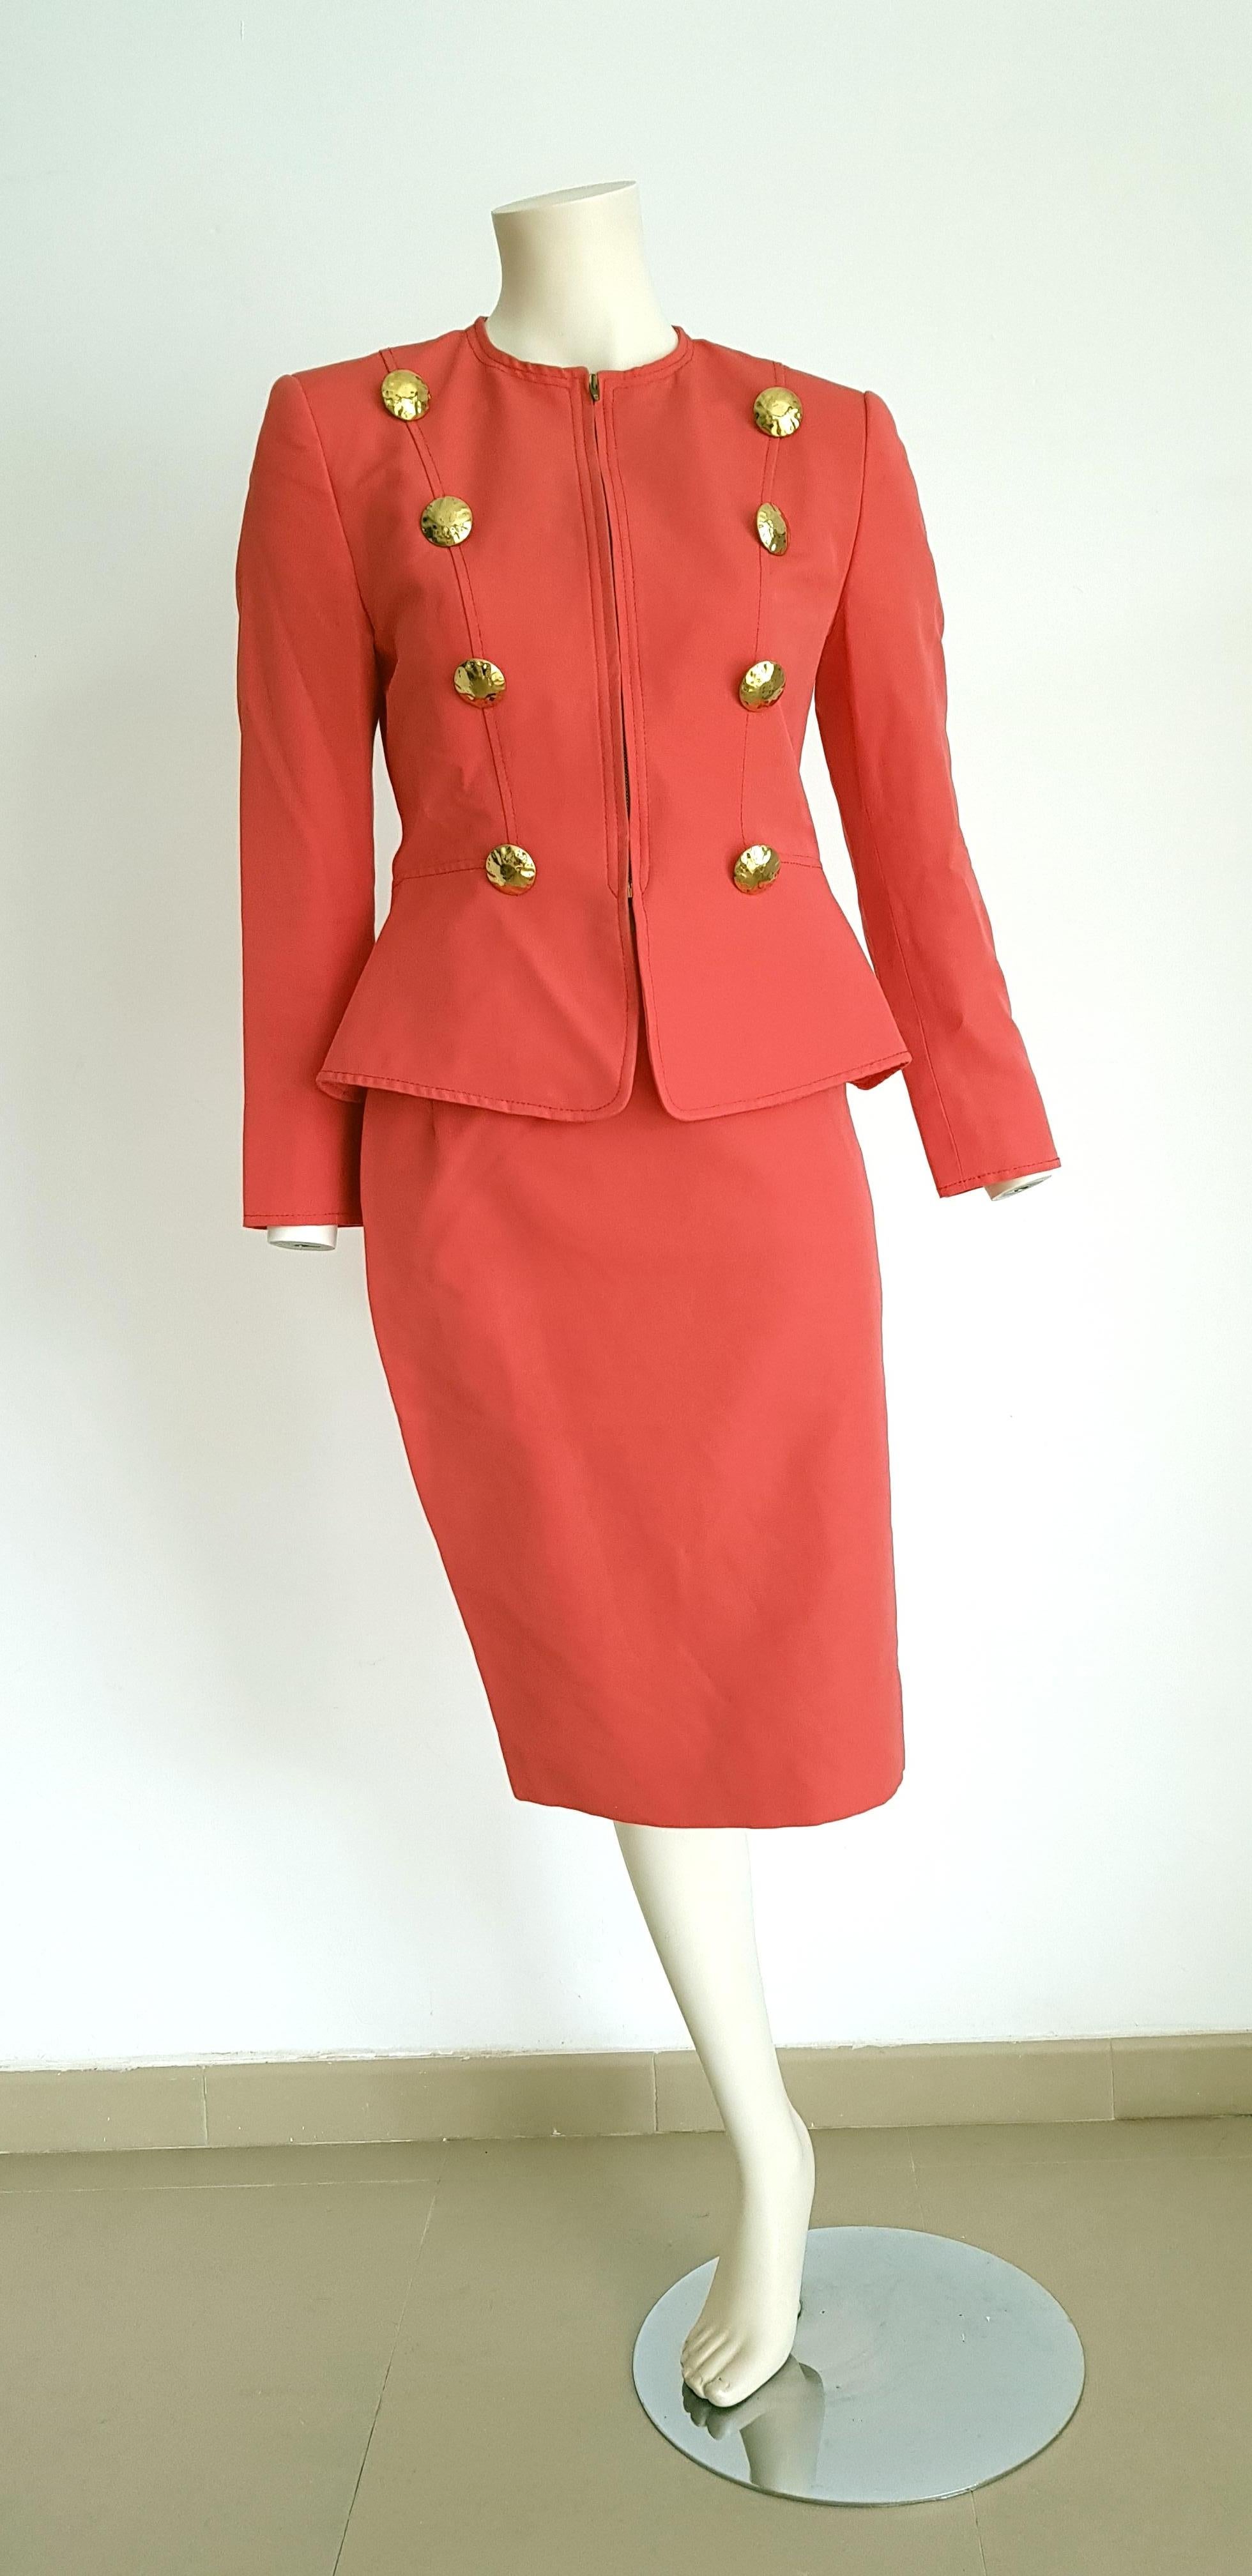 Christian LACROIX jacket and skirt cotton salmon color suit - Unworn, New

SIZE: equivalent to about Small / Medium, please review approx measurements as follows in cm. 
JACKET: lenght 61, chest underarm to underarm 47, bust circumference 84,